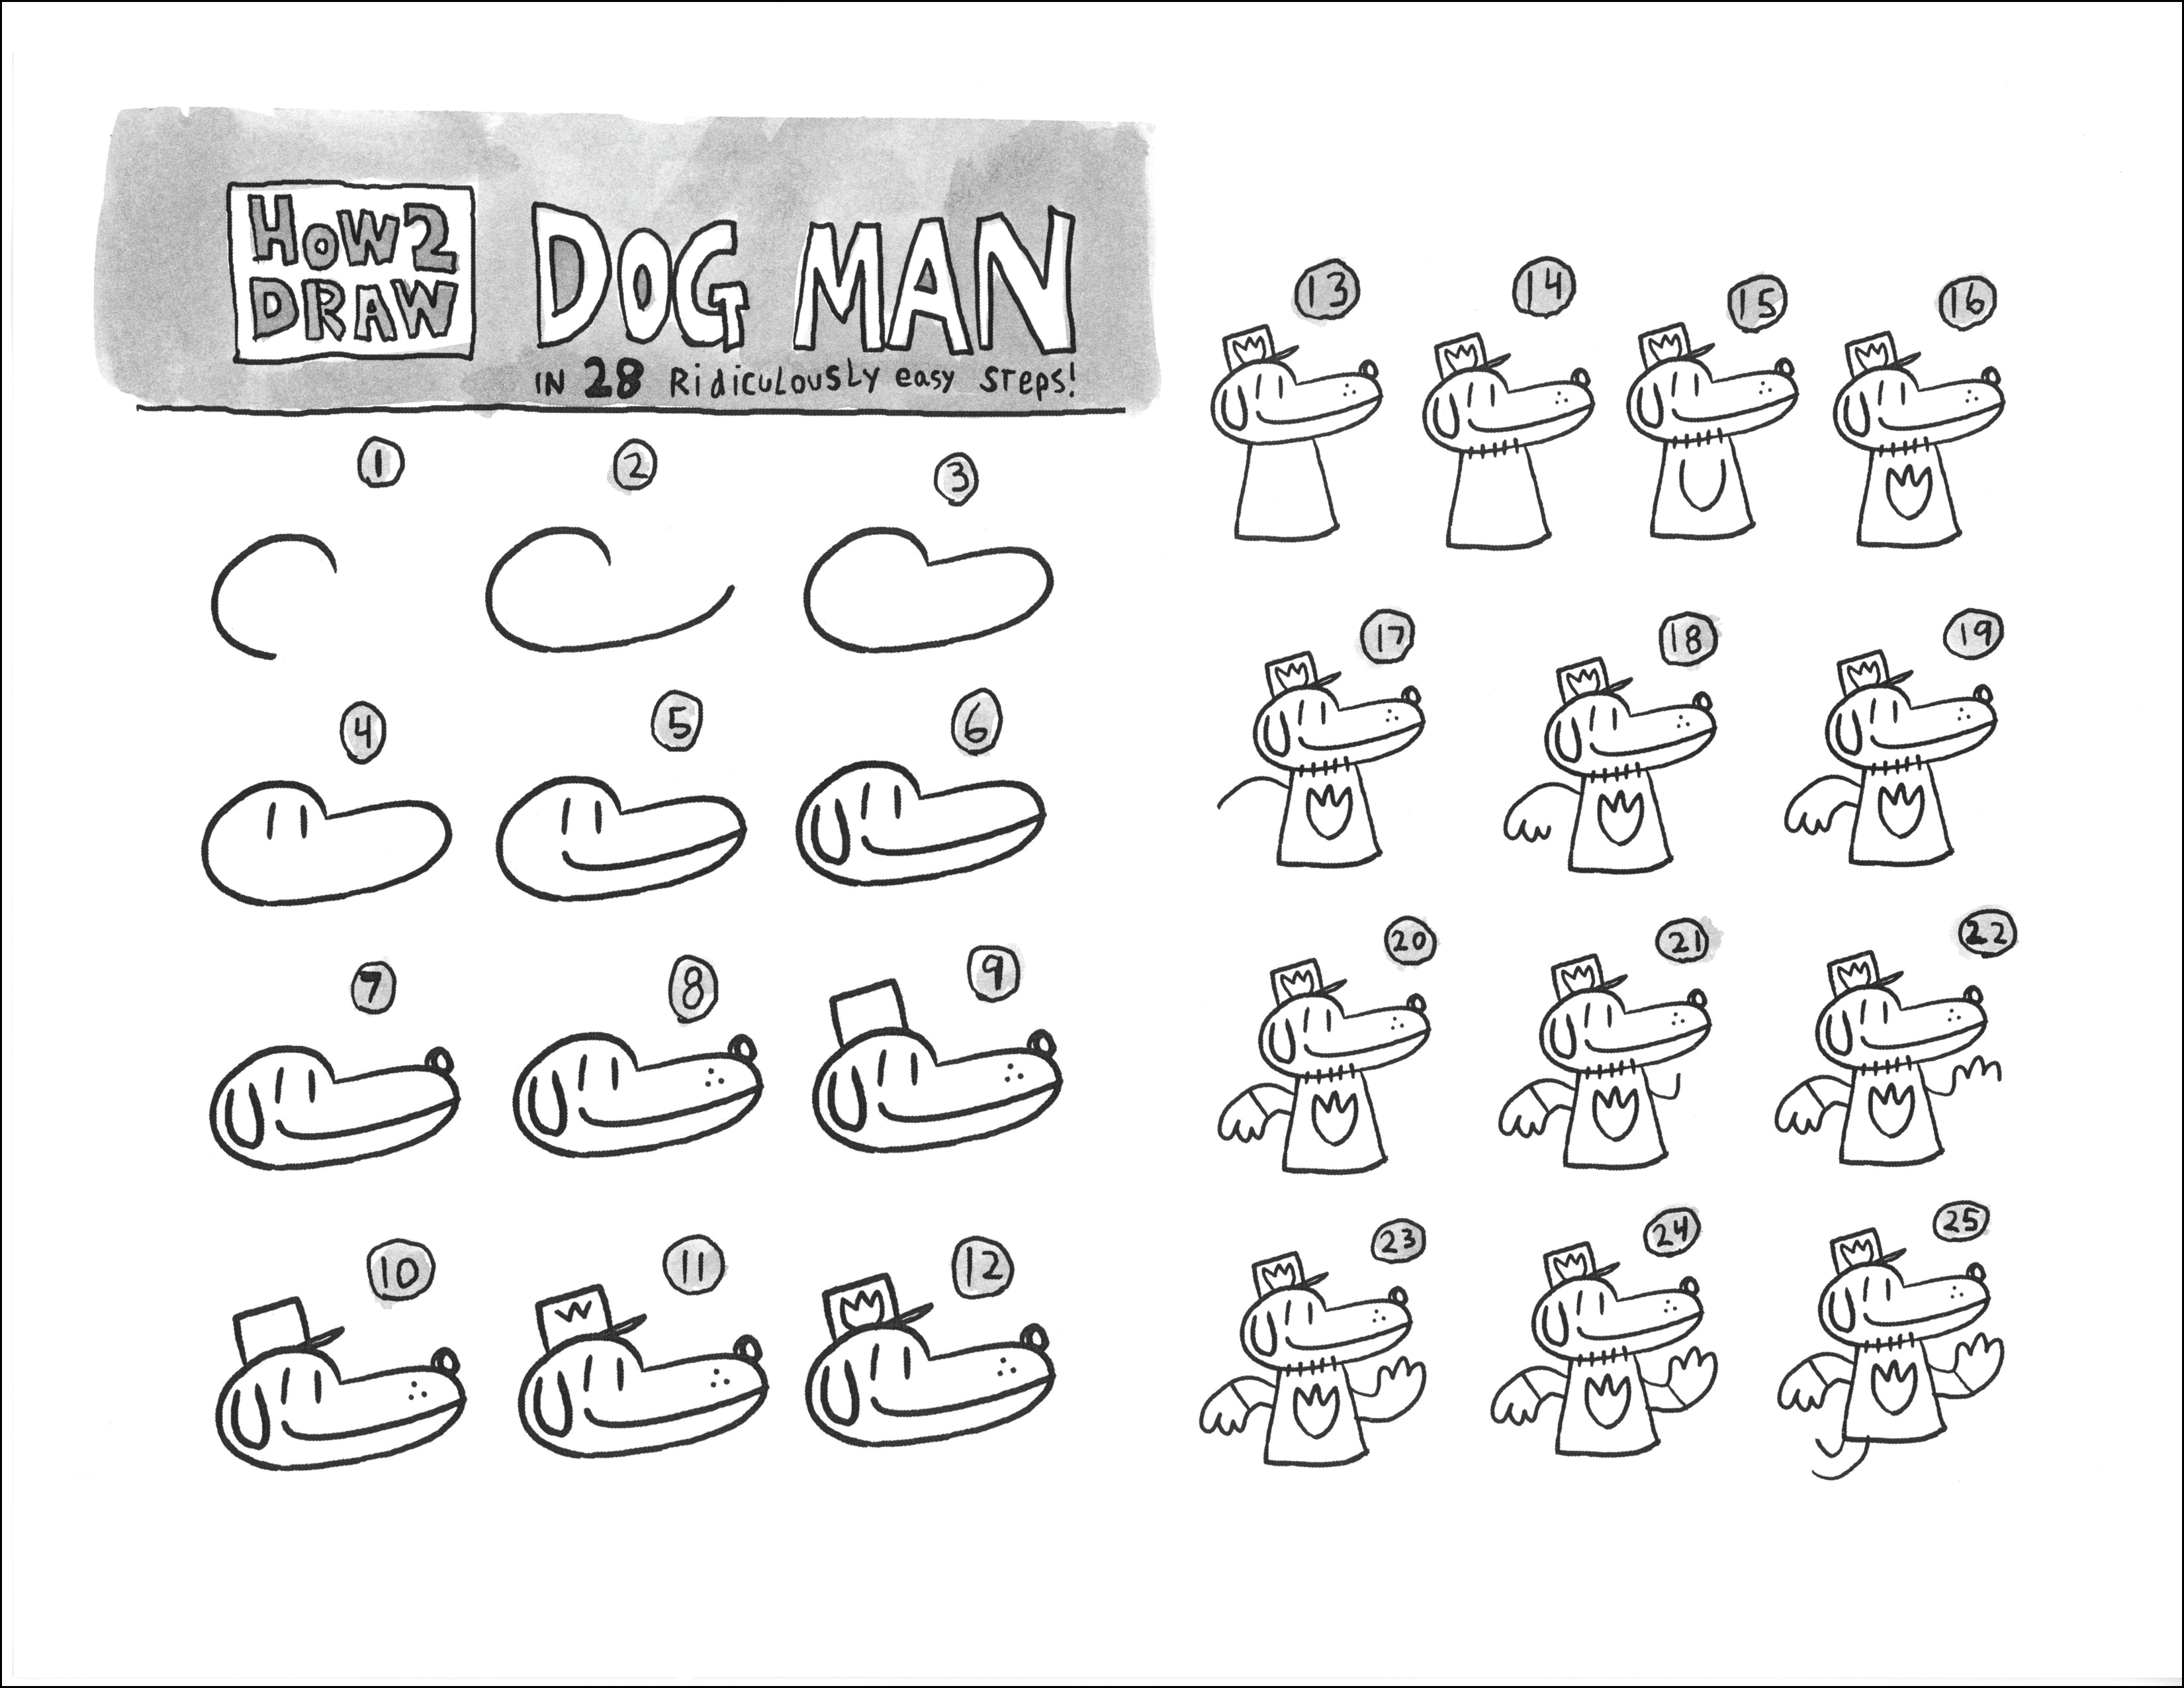 Learn how to draw Dog Man